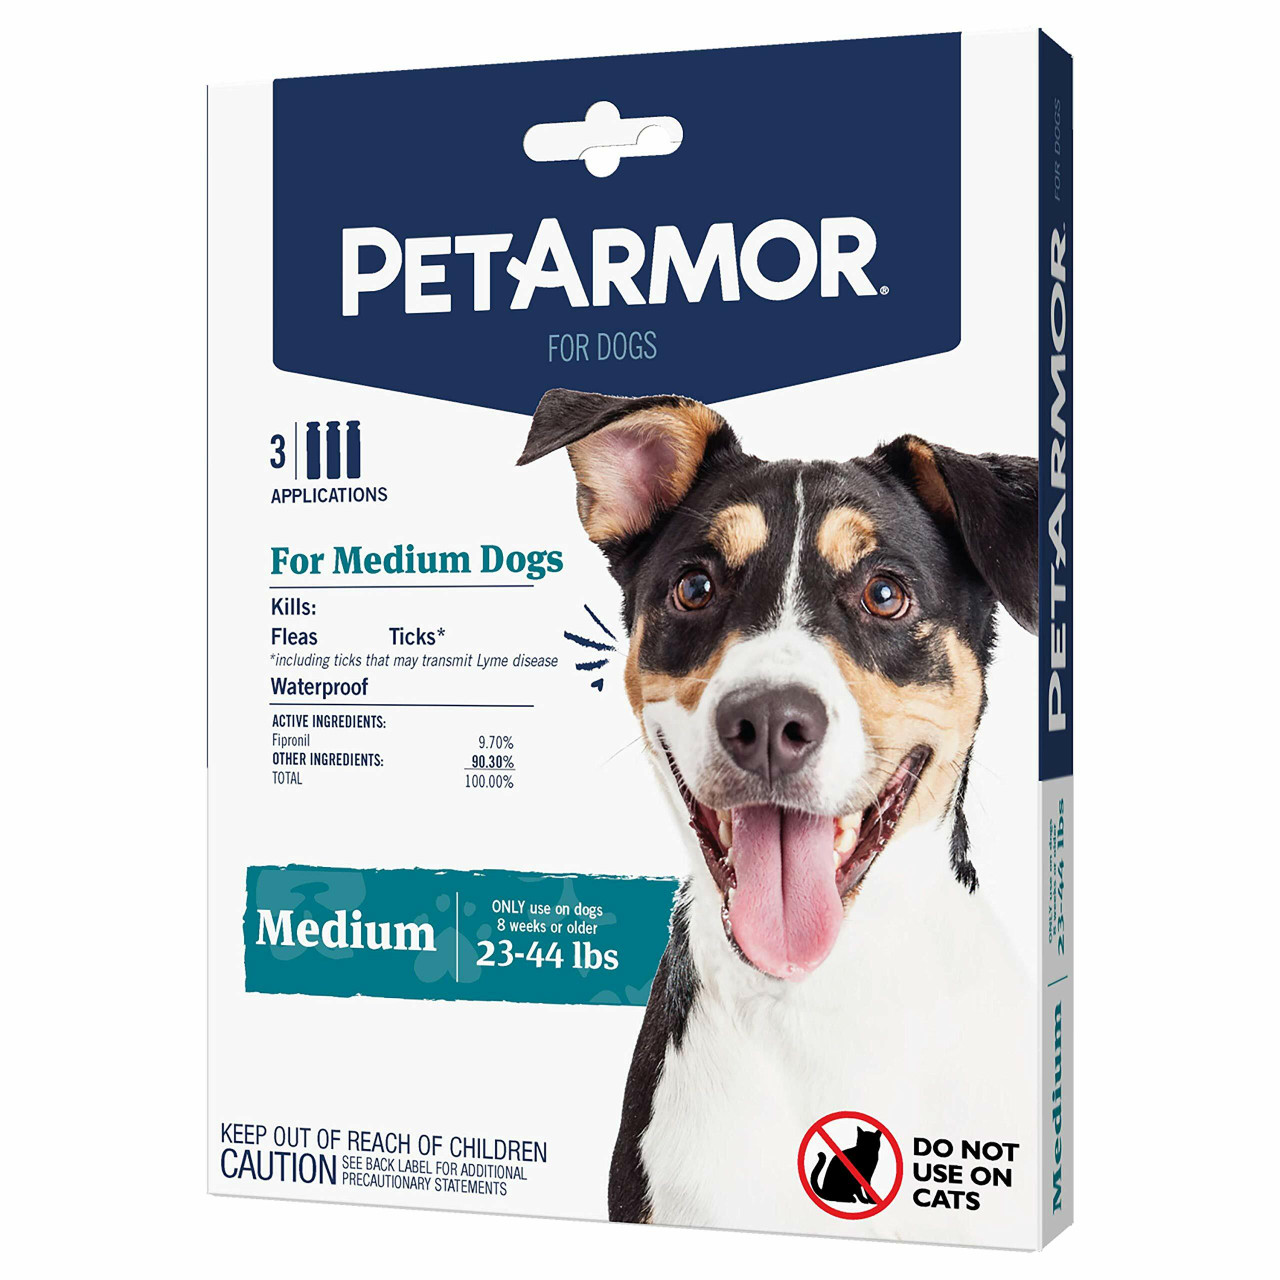 Pet Armor for Dogs